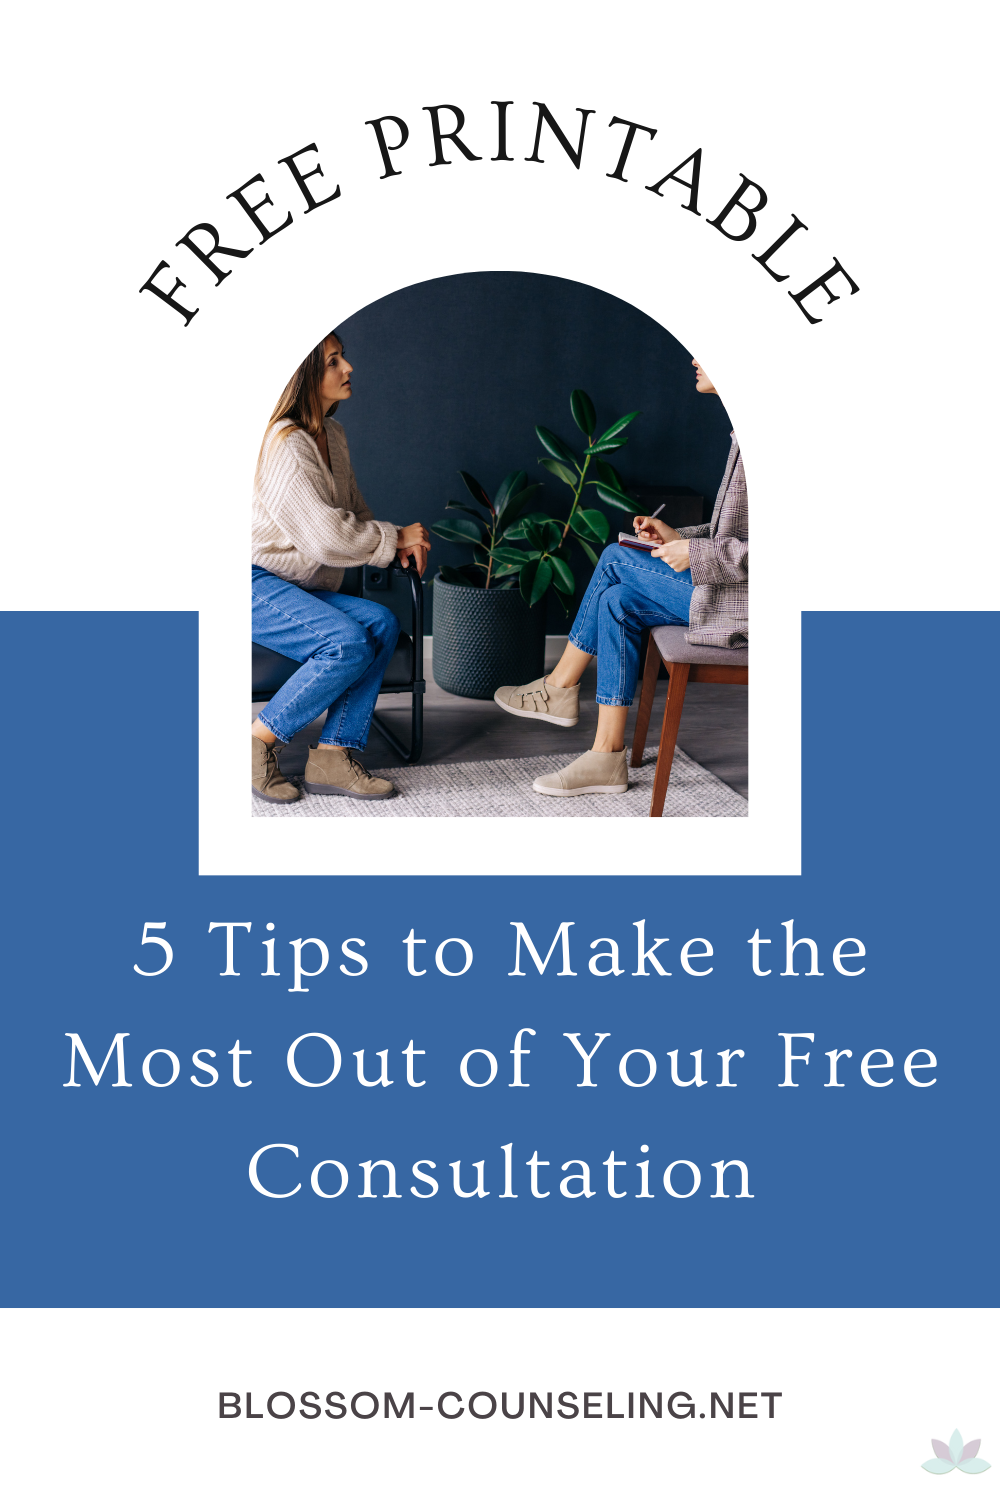 5 Tips to Make the Most Out of Your Free Consultation